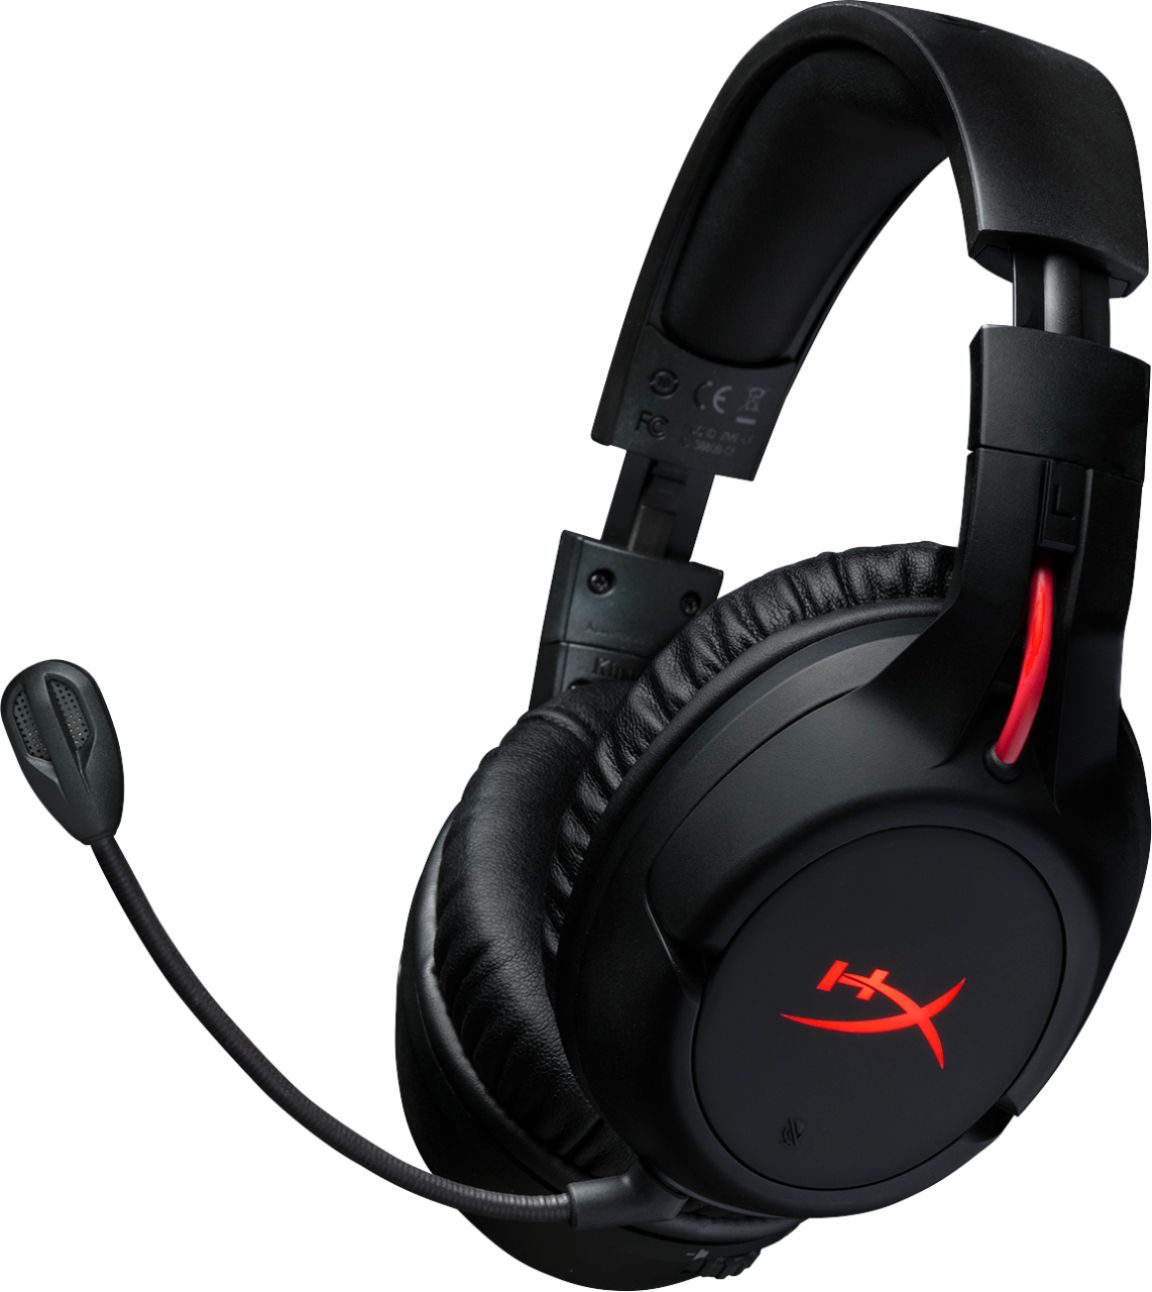 Hyperx Cloud Flight Wireless Stereo Gaming Headset For Pc Ps5 And Ps4 Black 4p5l4aa Abl Hx Hscf Bk Am Best Buy